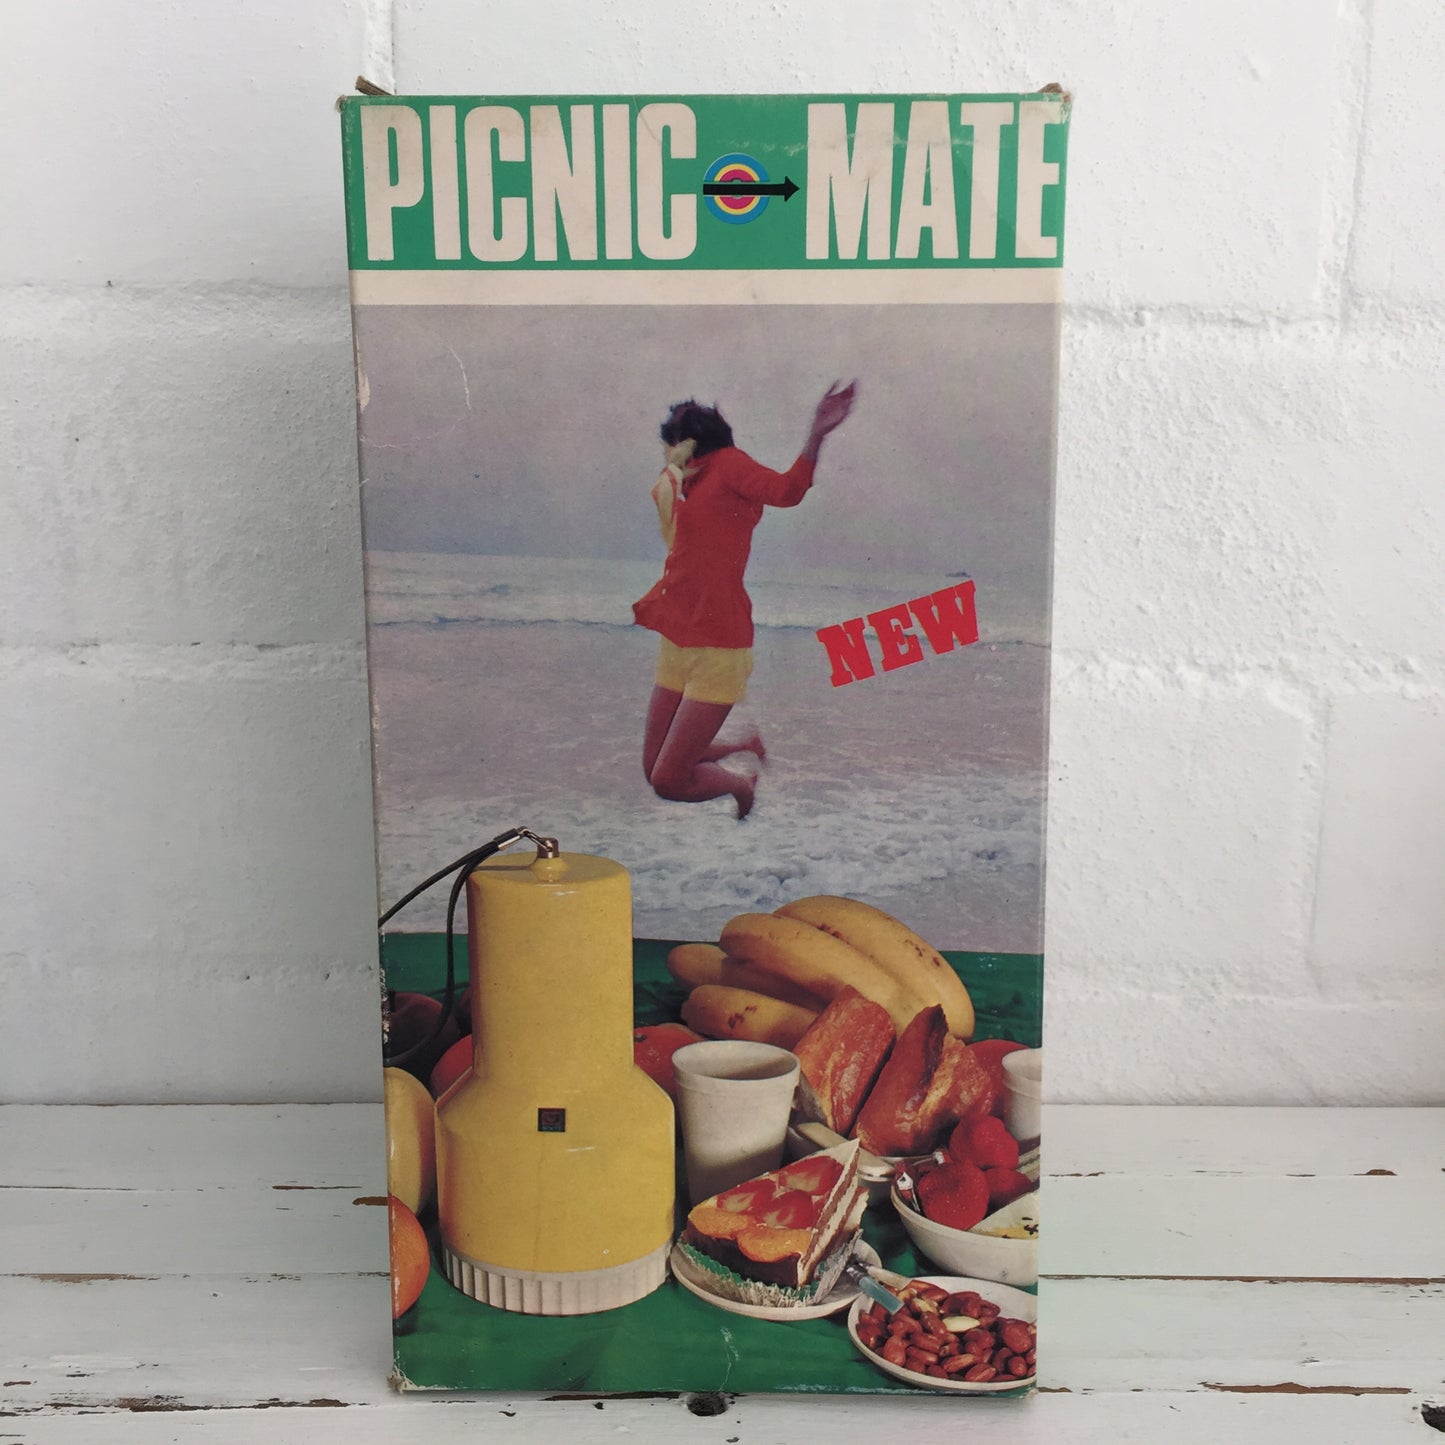 PICNIC MATE Unused Set in Small Portable Carry Container Caravan Camping